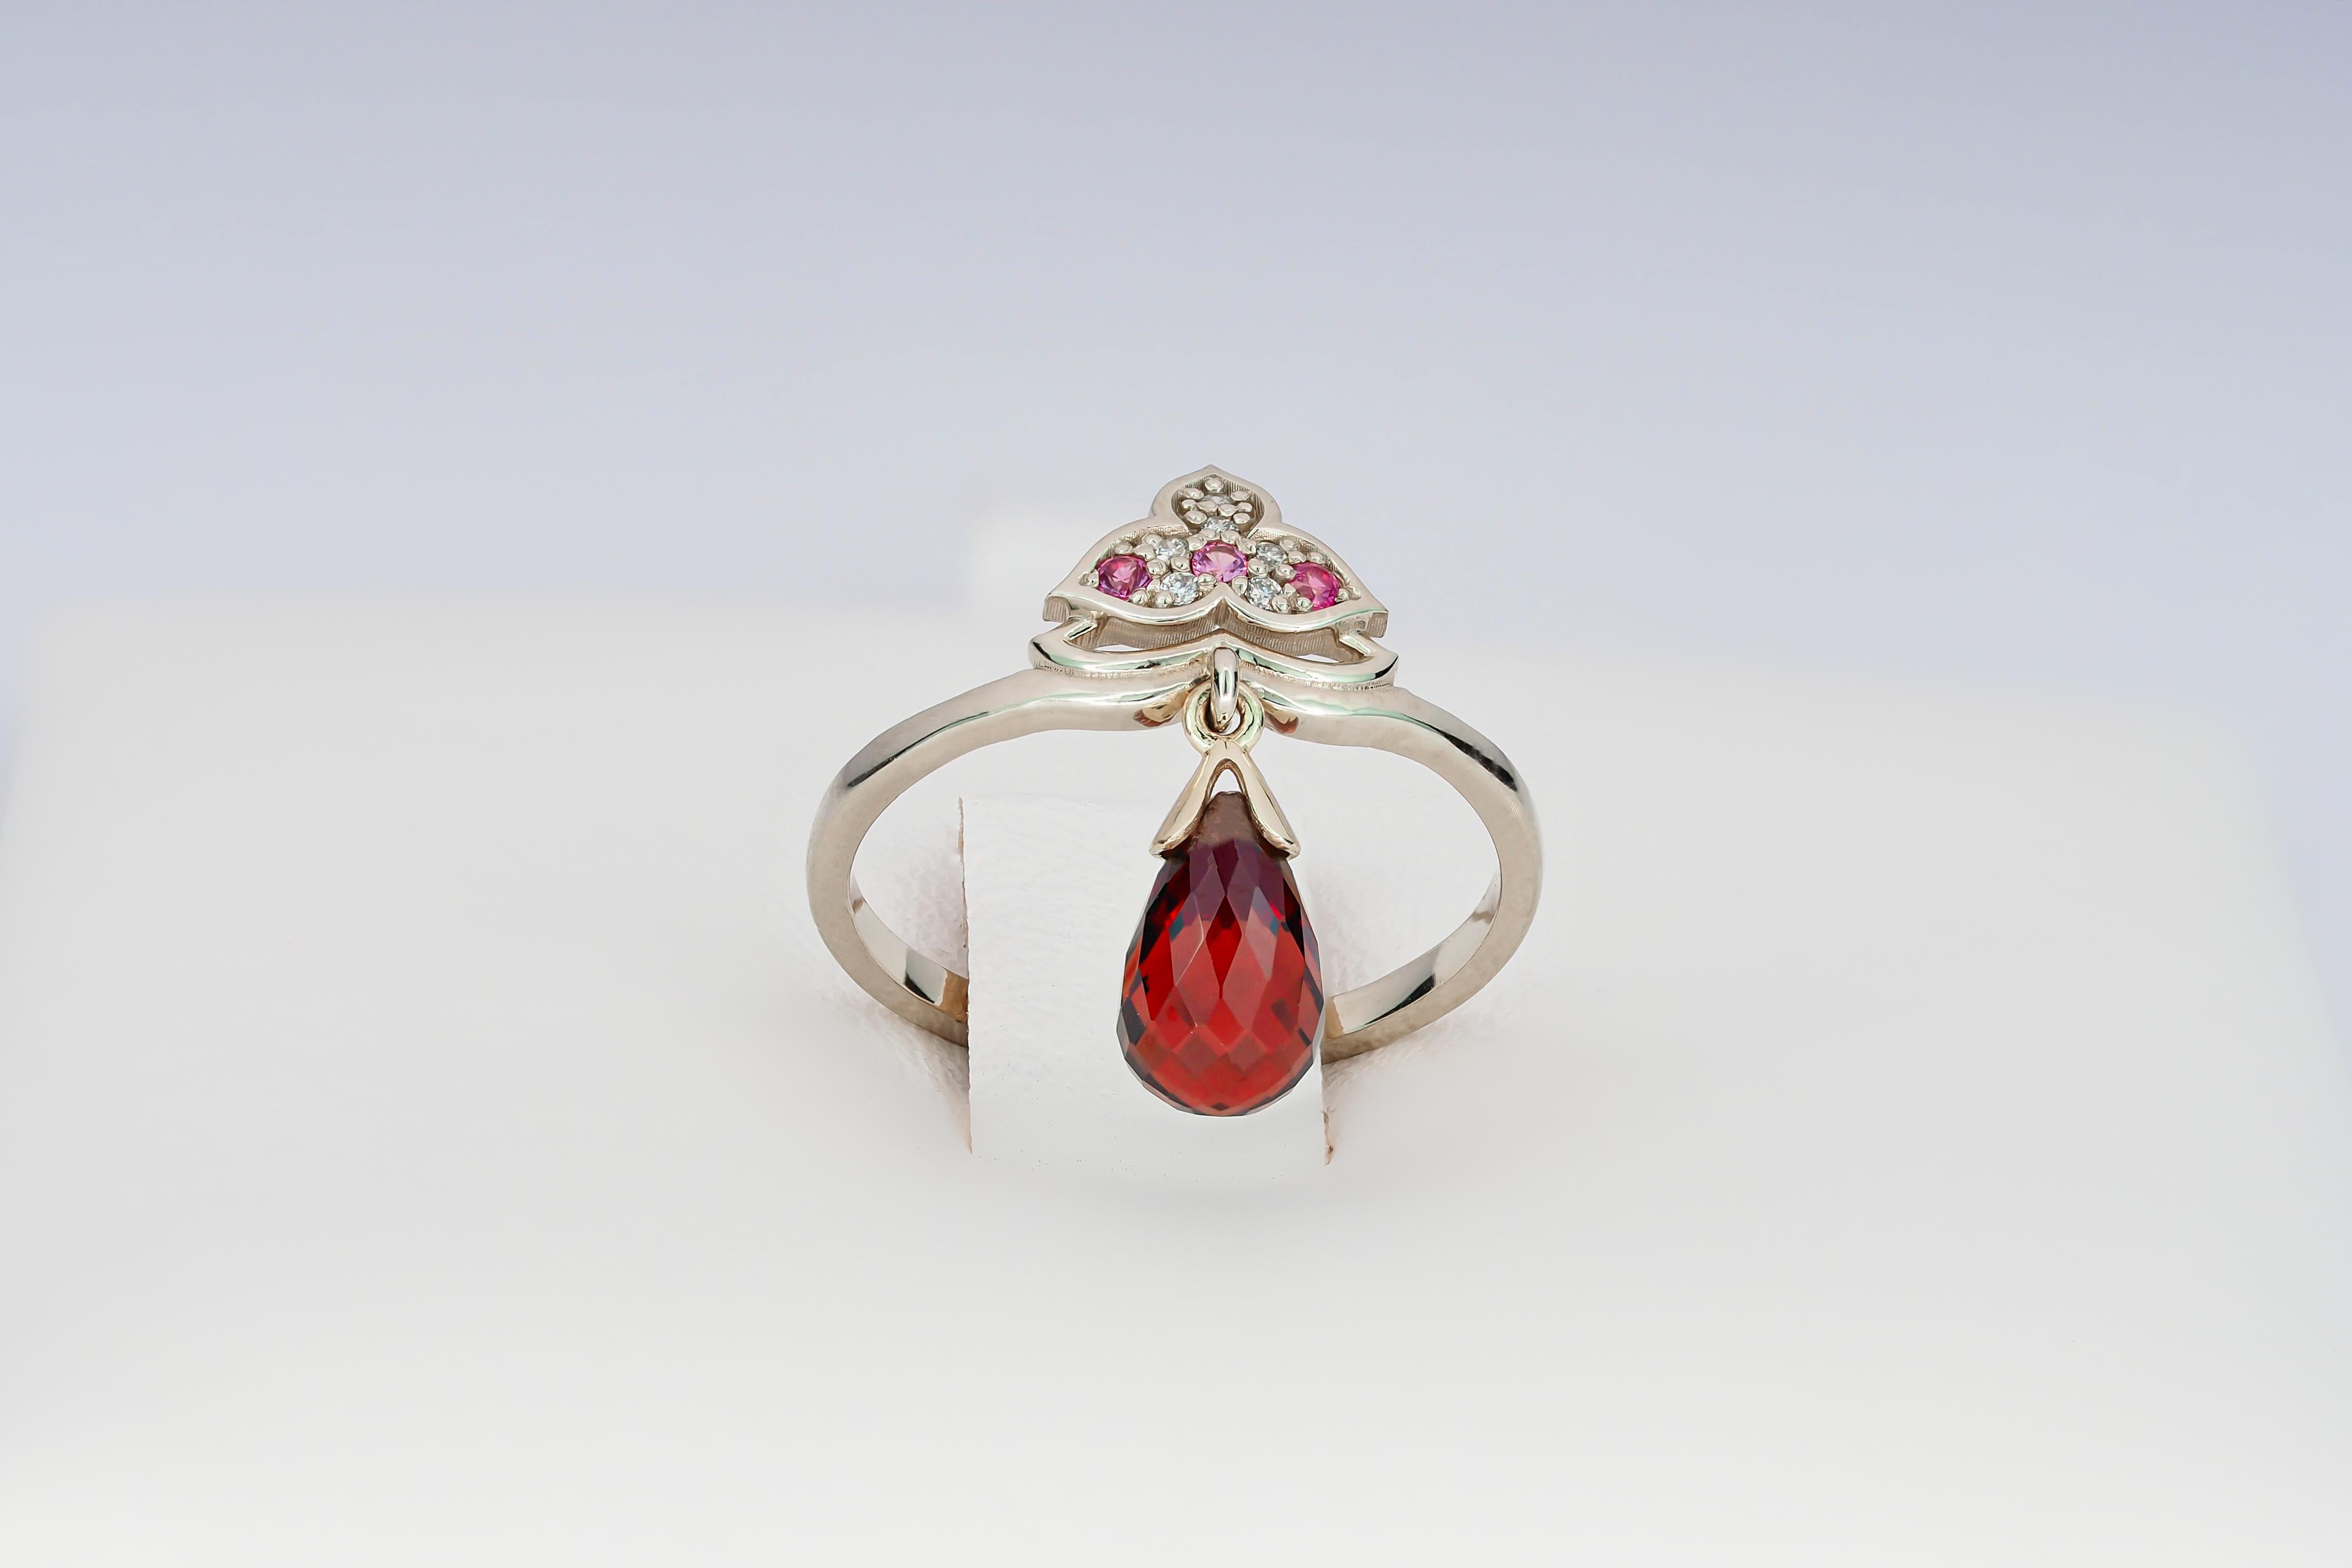 For Sale:  14k Gold Lotus Ring with Garnet, Sapphires and Diamonds 6